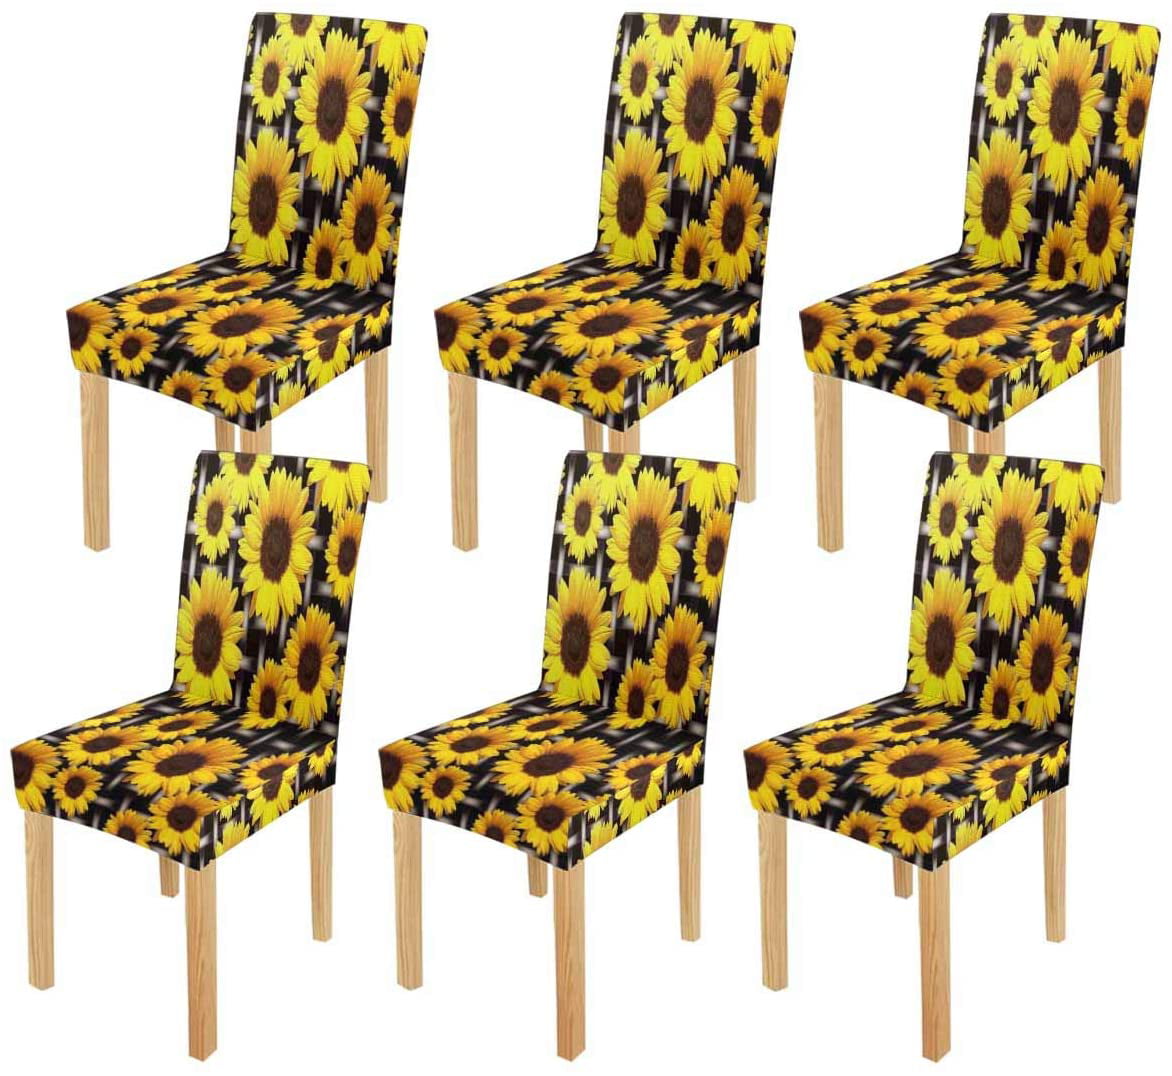 KXMDXA Leopard Print Design Stretch Chair Cover Protector Seat 